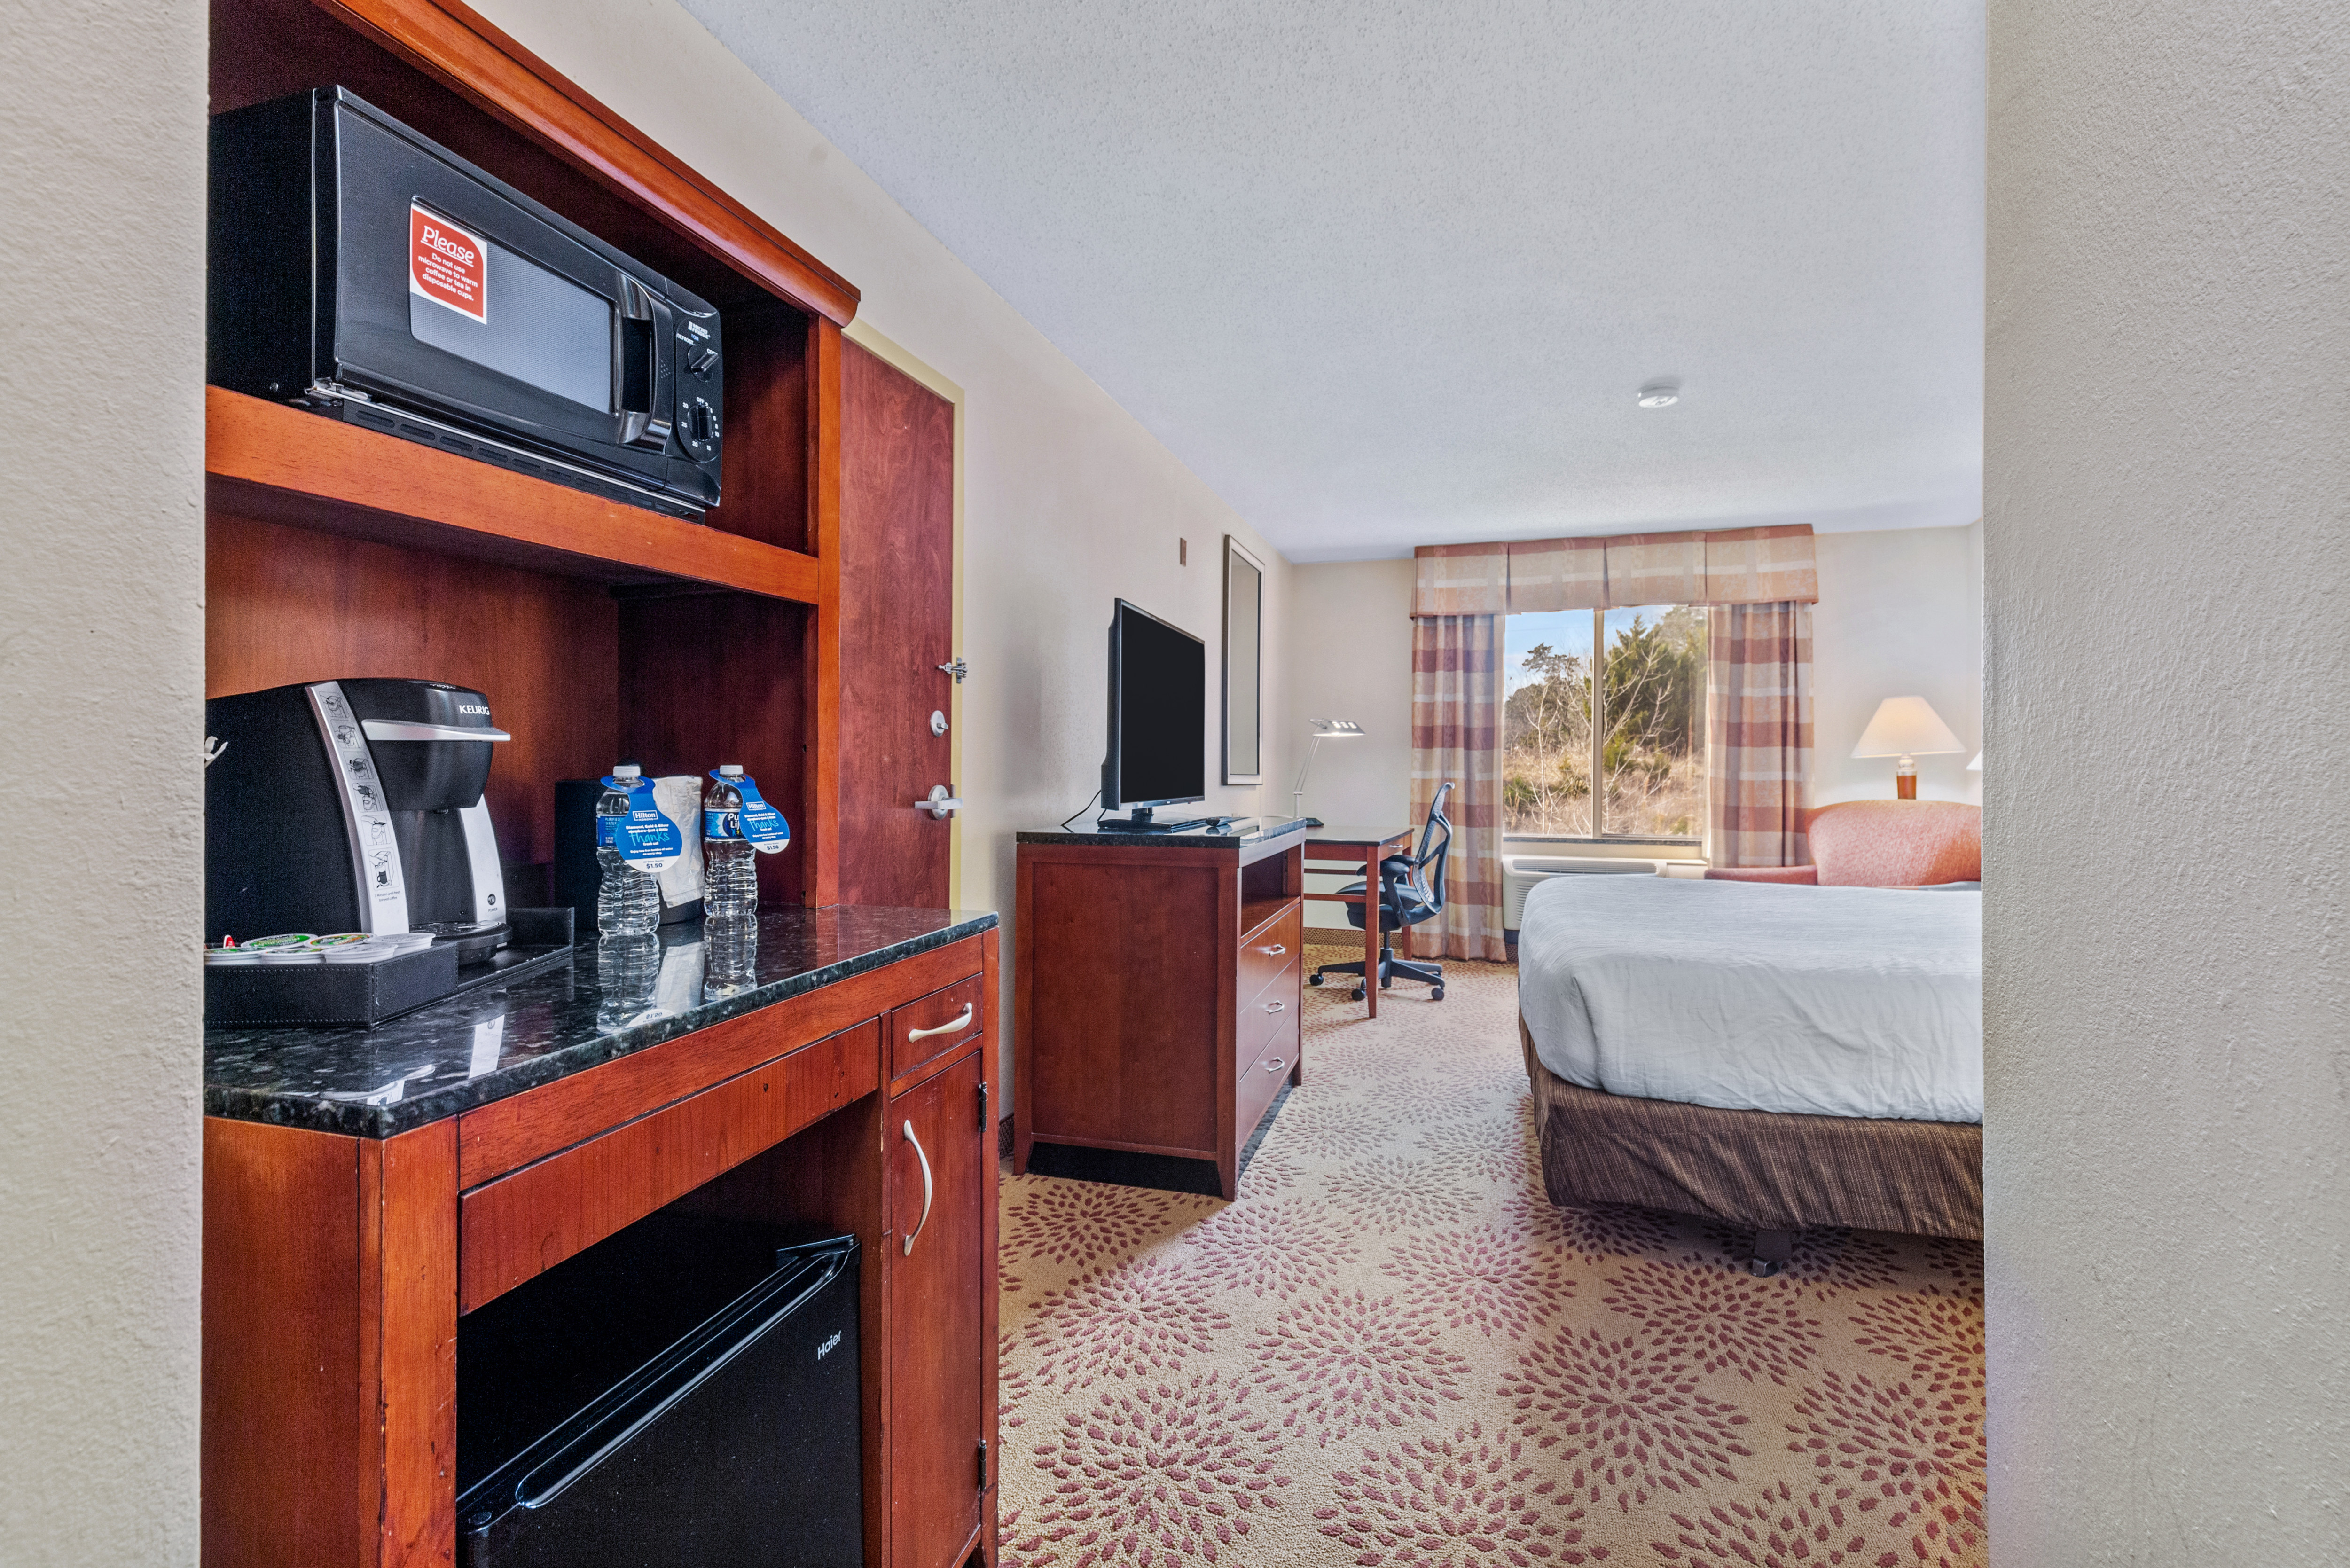 King Guestroom With Amenities 